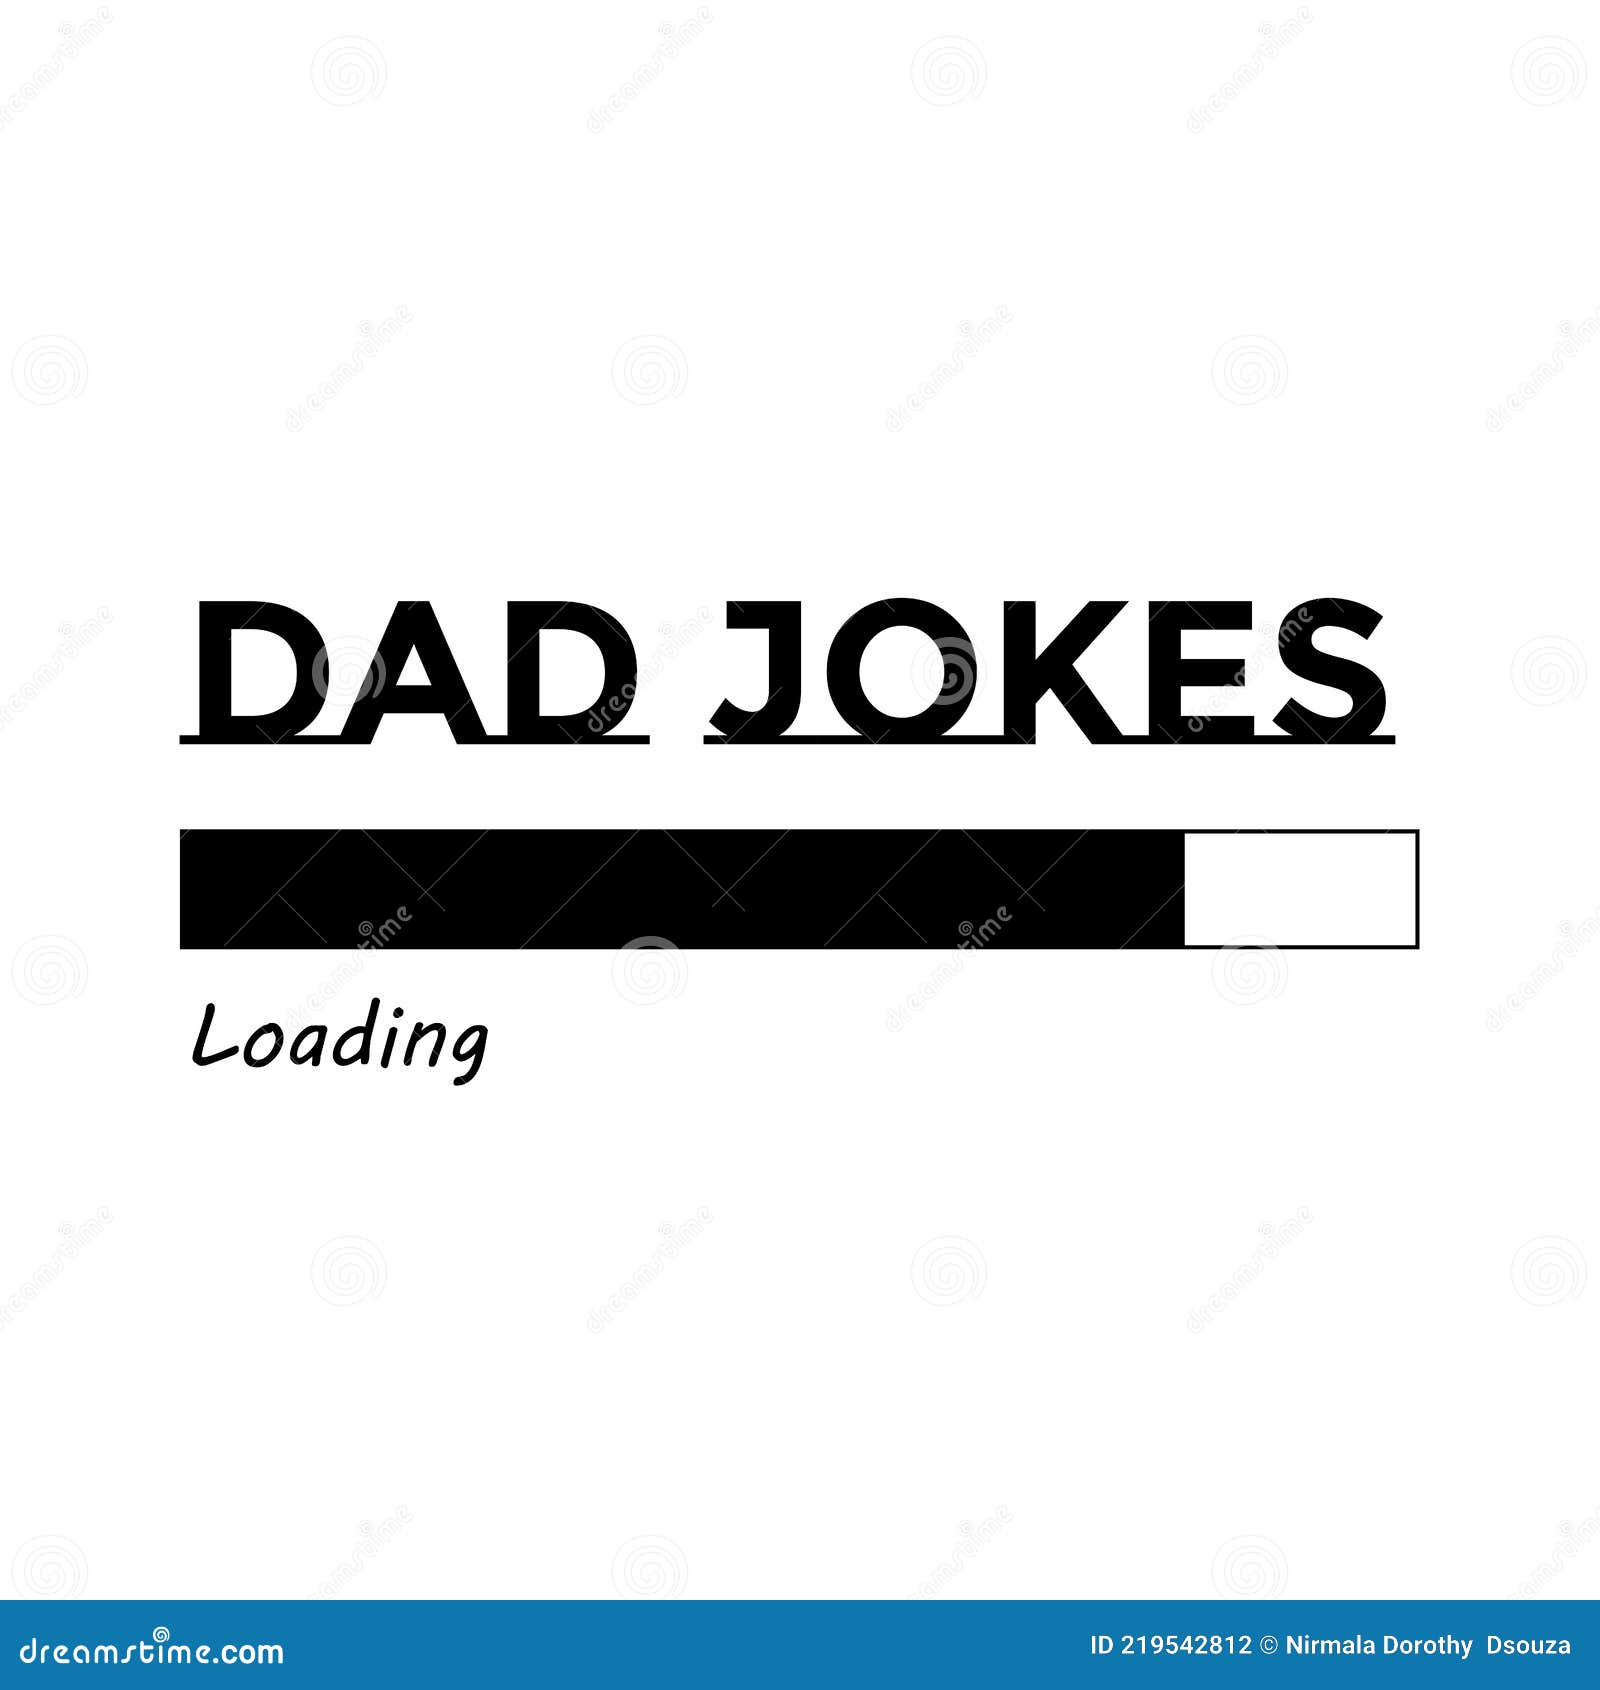 happy fathers day - dad jokes loading